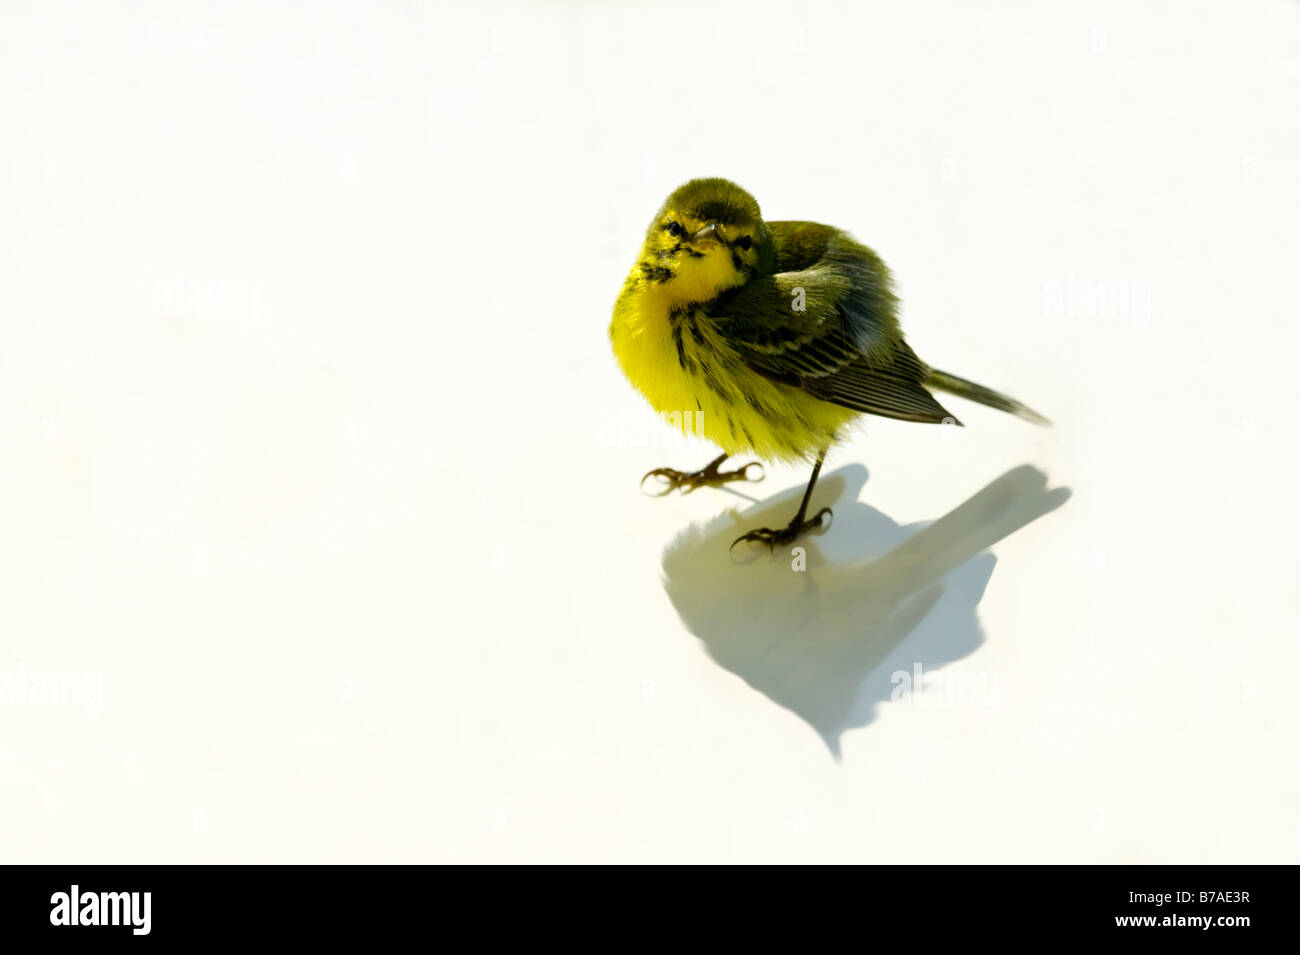 Goldenfinch on white background with shadow BHZ Stock Photo